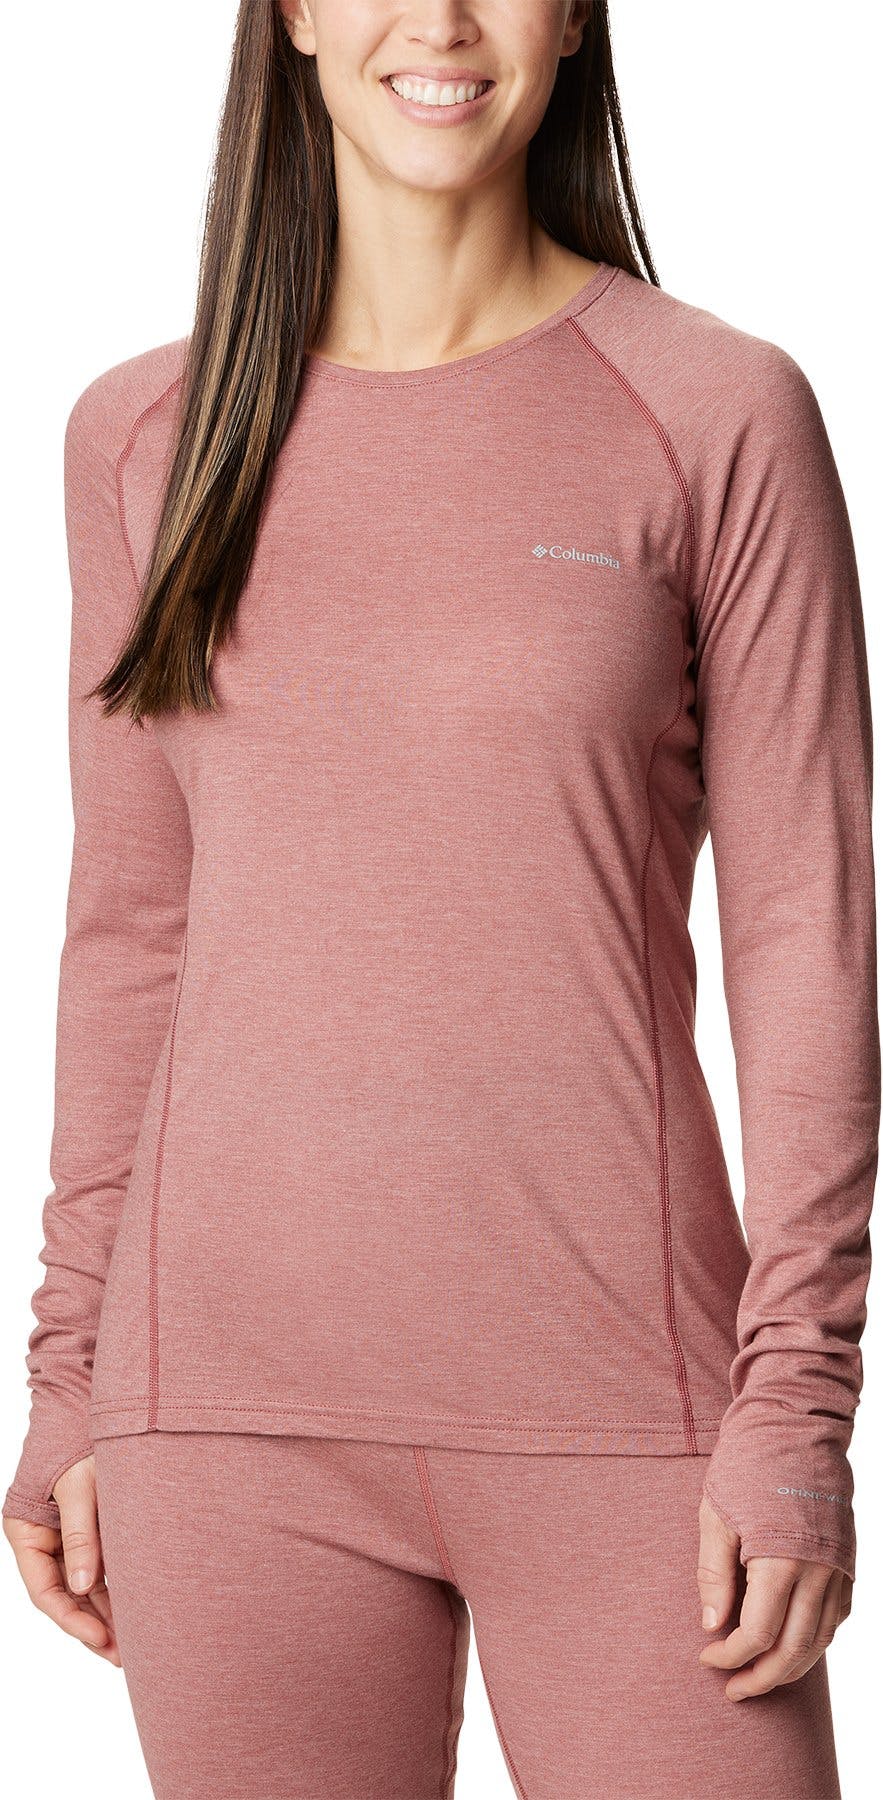 Product image for Tunnel Springs Wool Crew Neck Baselayer Top - Women's 